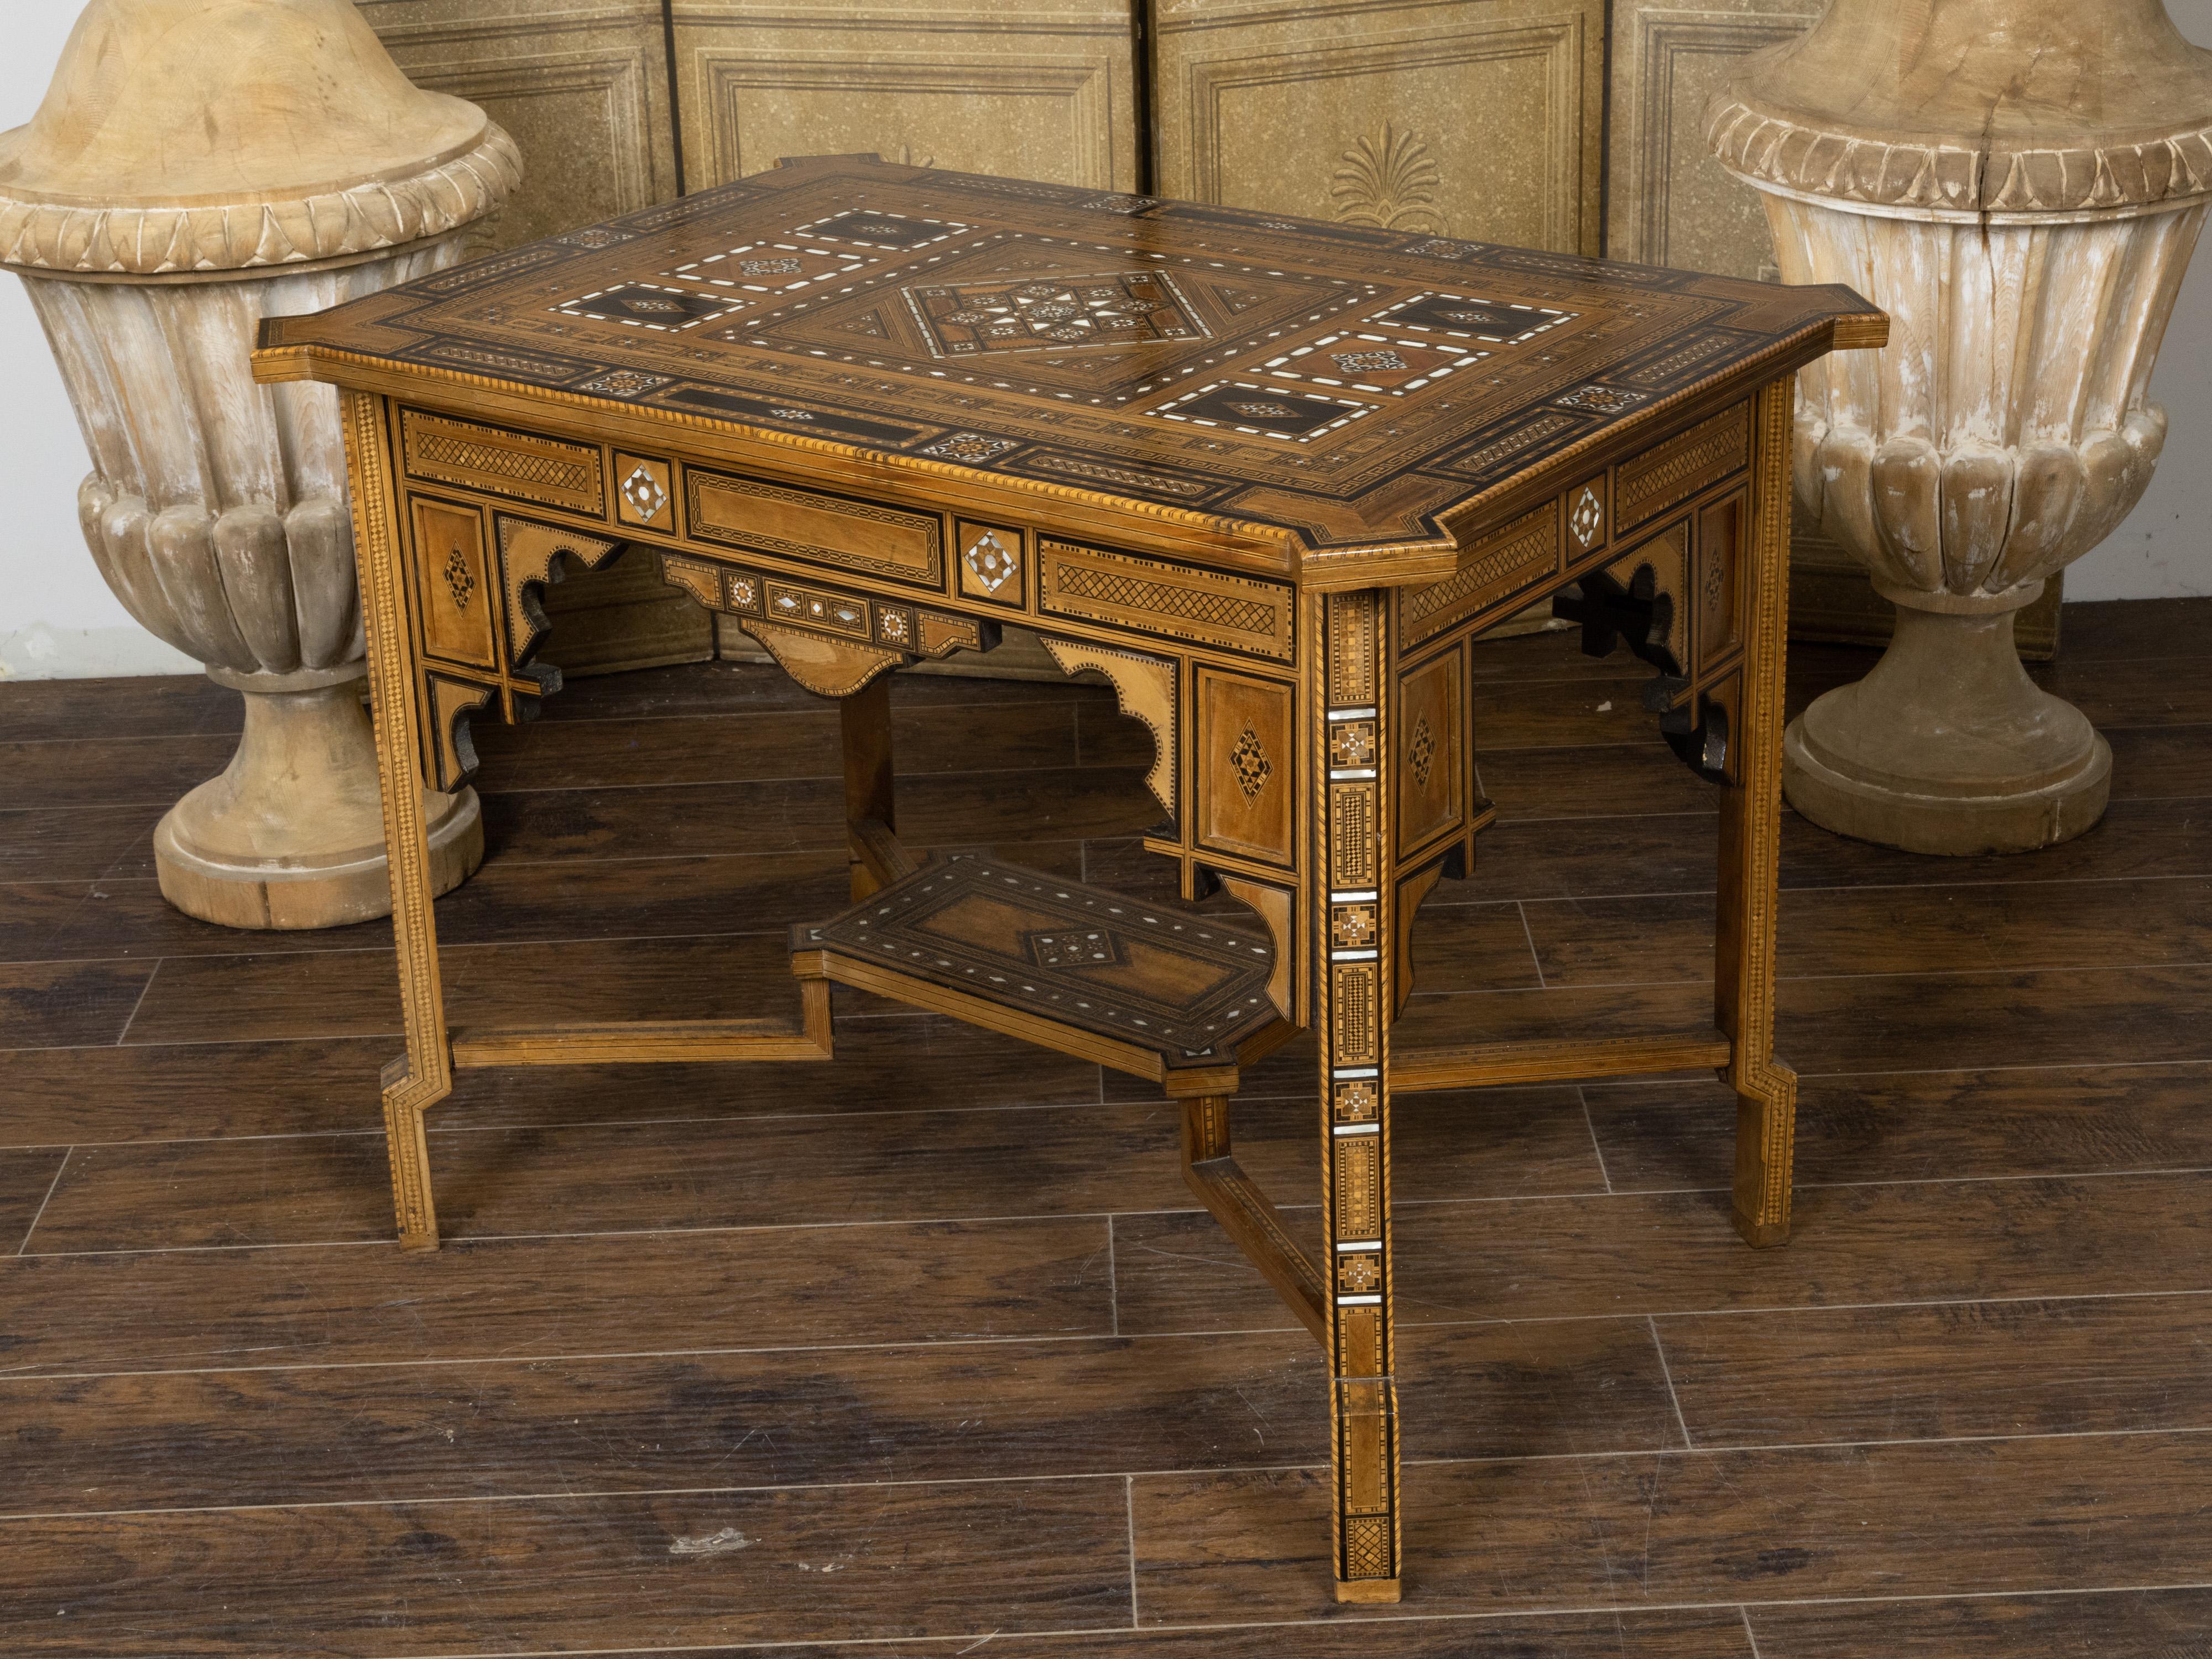 Inlay Moorish Style Moroccan Center Table with Inlaid Mother of Pearl Geometric Motifs For Sale